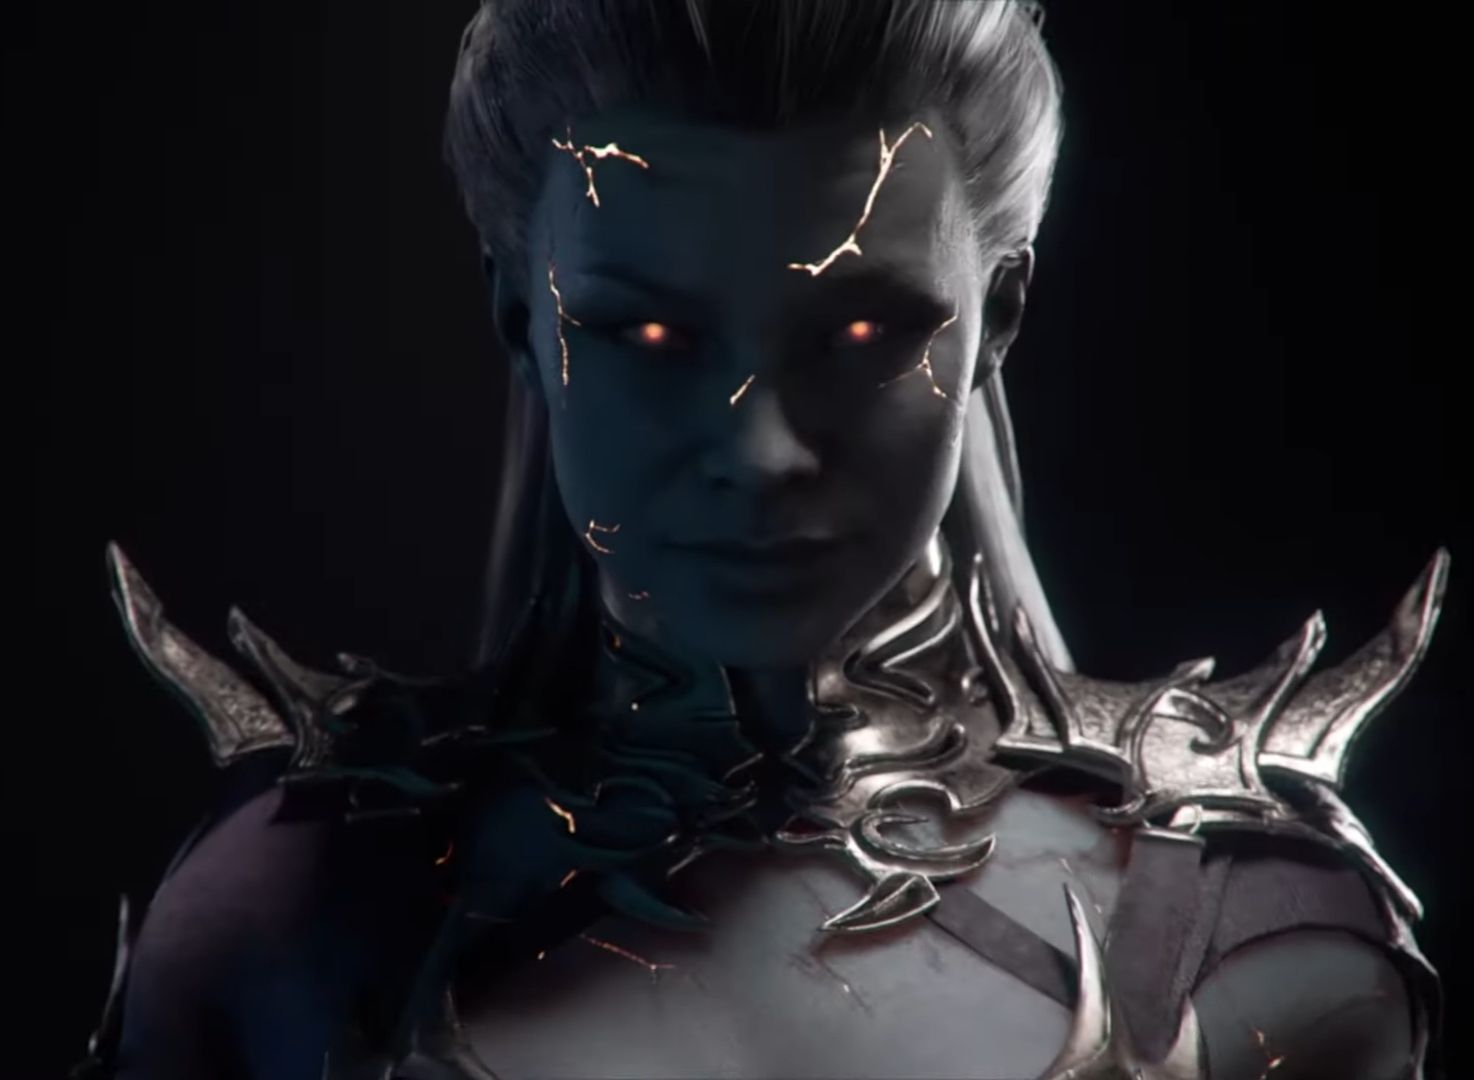 Thoughts on Sindel?